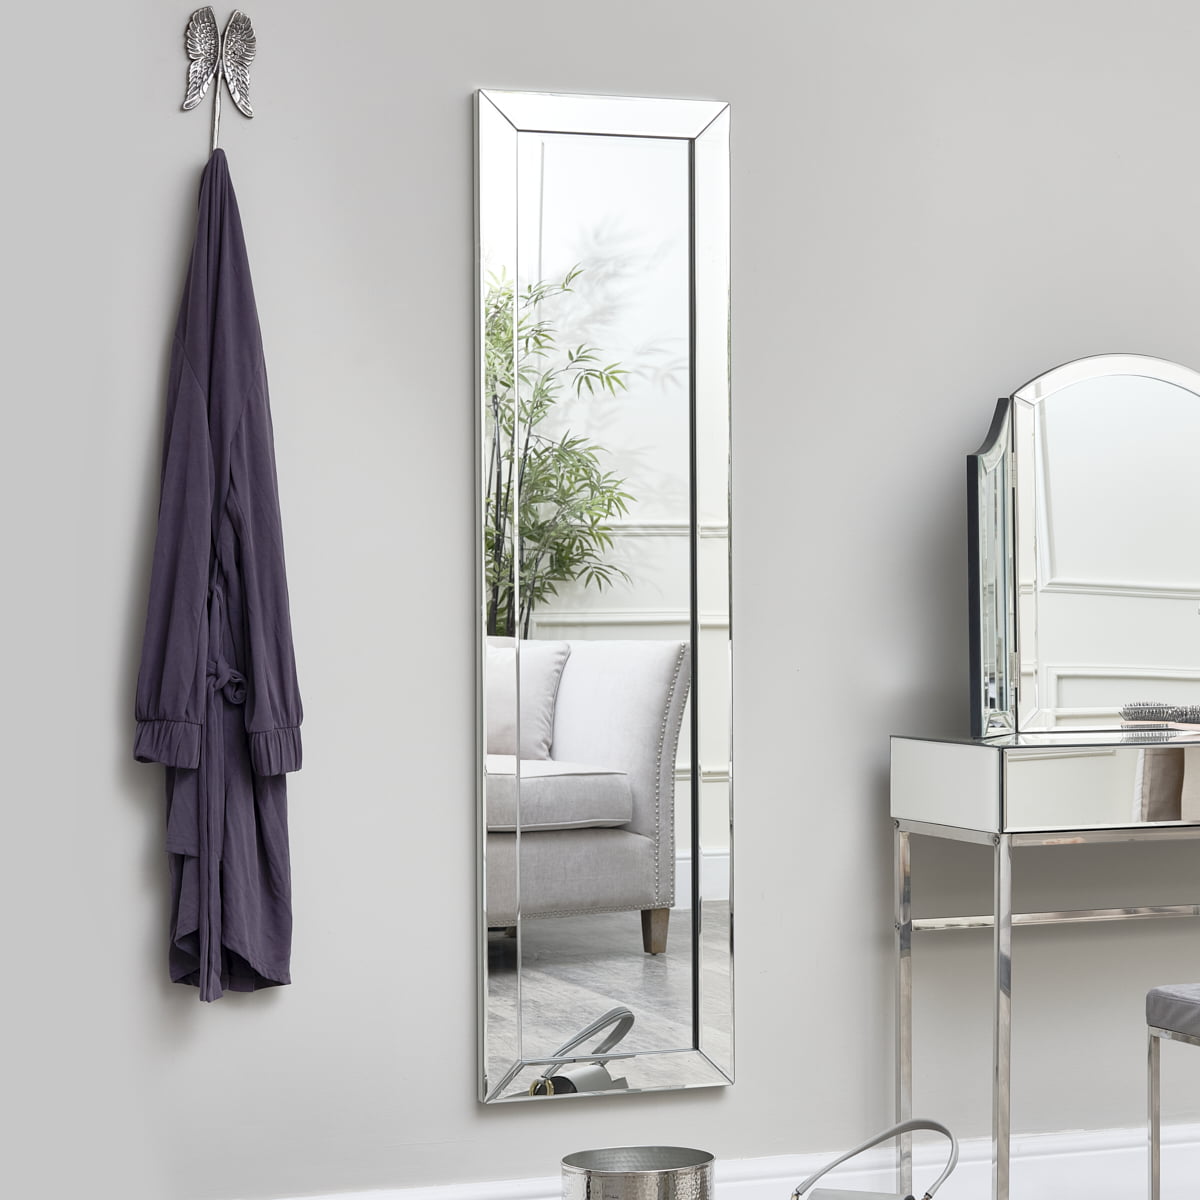 A full-length mirror in a modern room reflecting a cozy interior with a grey sofa and a potted plant